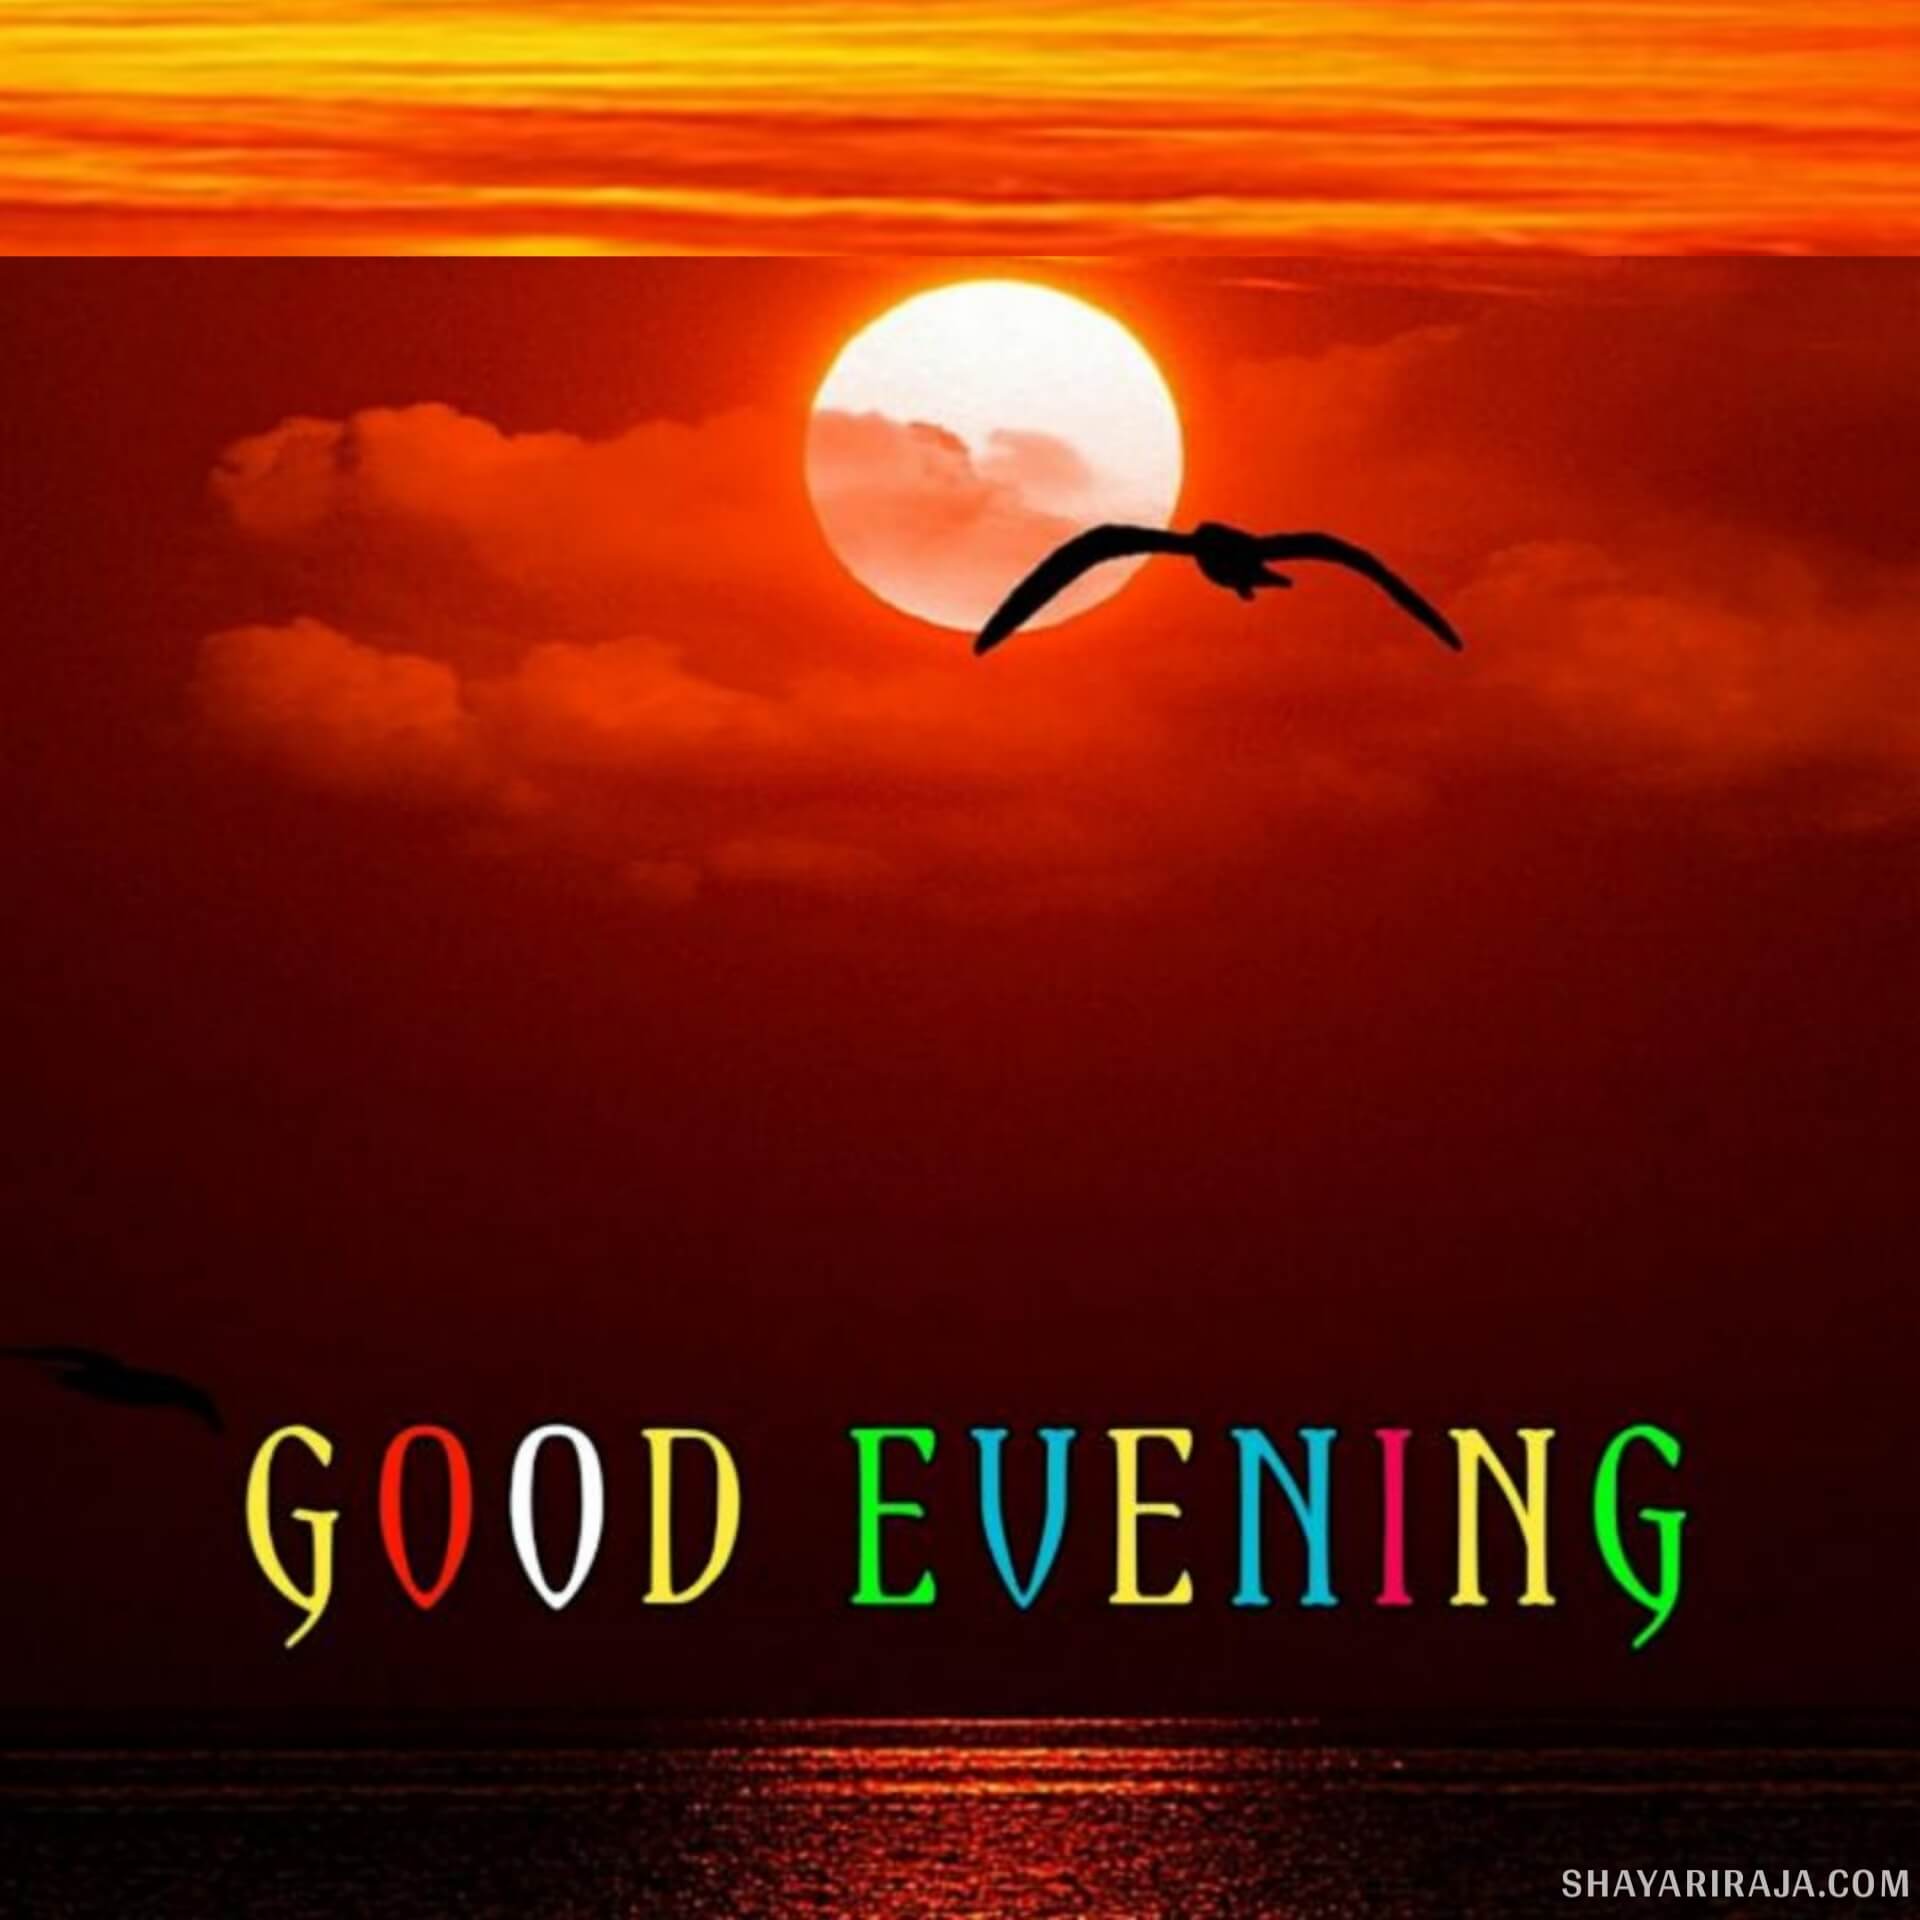 50+ Best Good Evening Images Wishes & Quotes